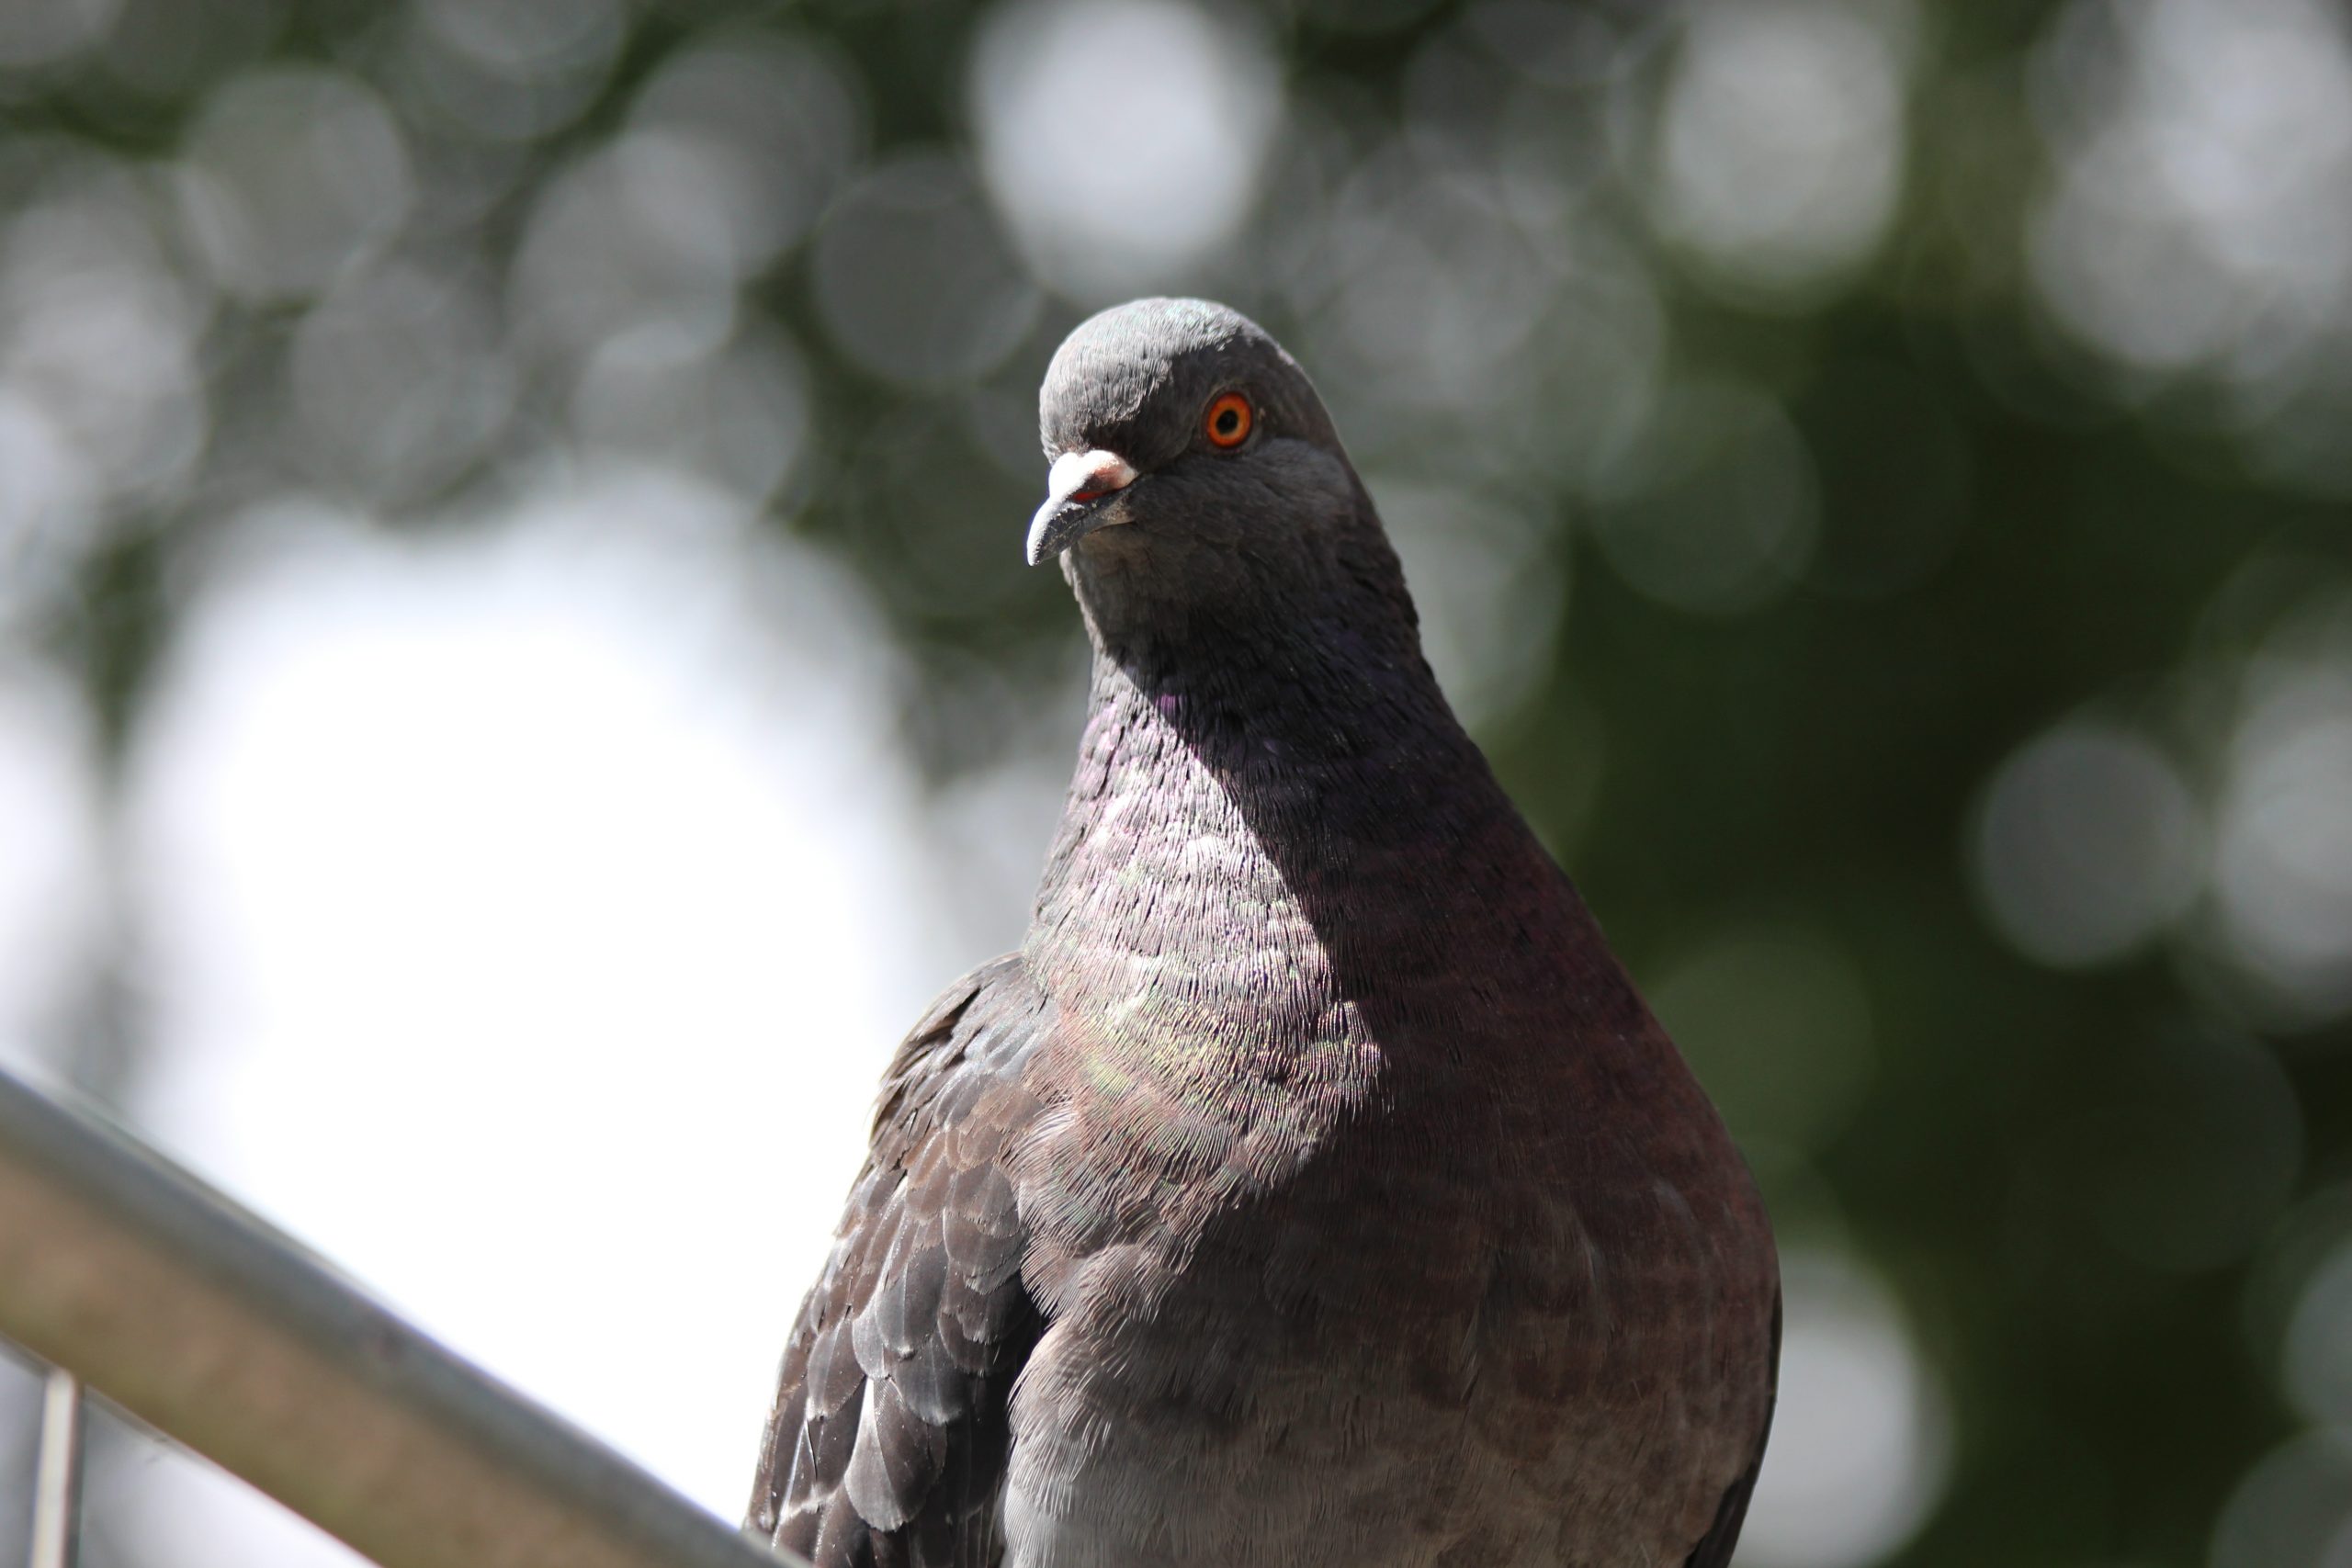 Youths arrested after stealing valuable racing pigeons from Benidorm on Spain's Costa Blanca